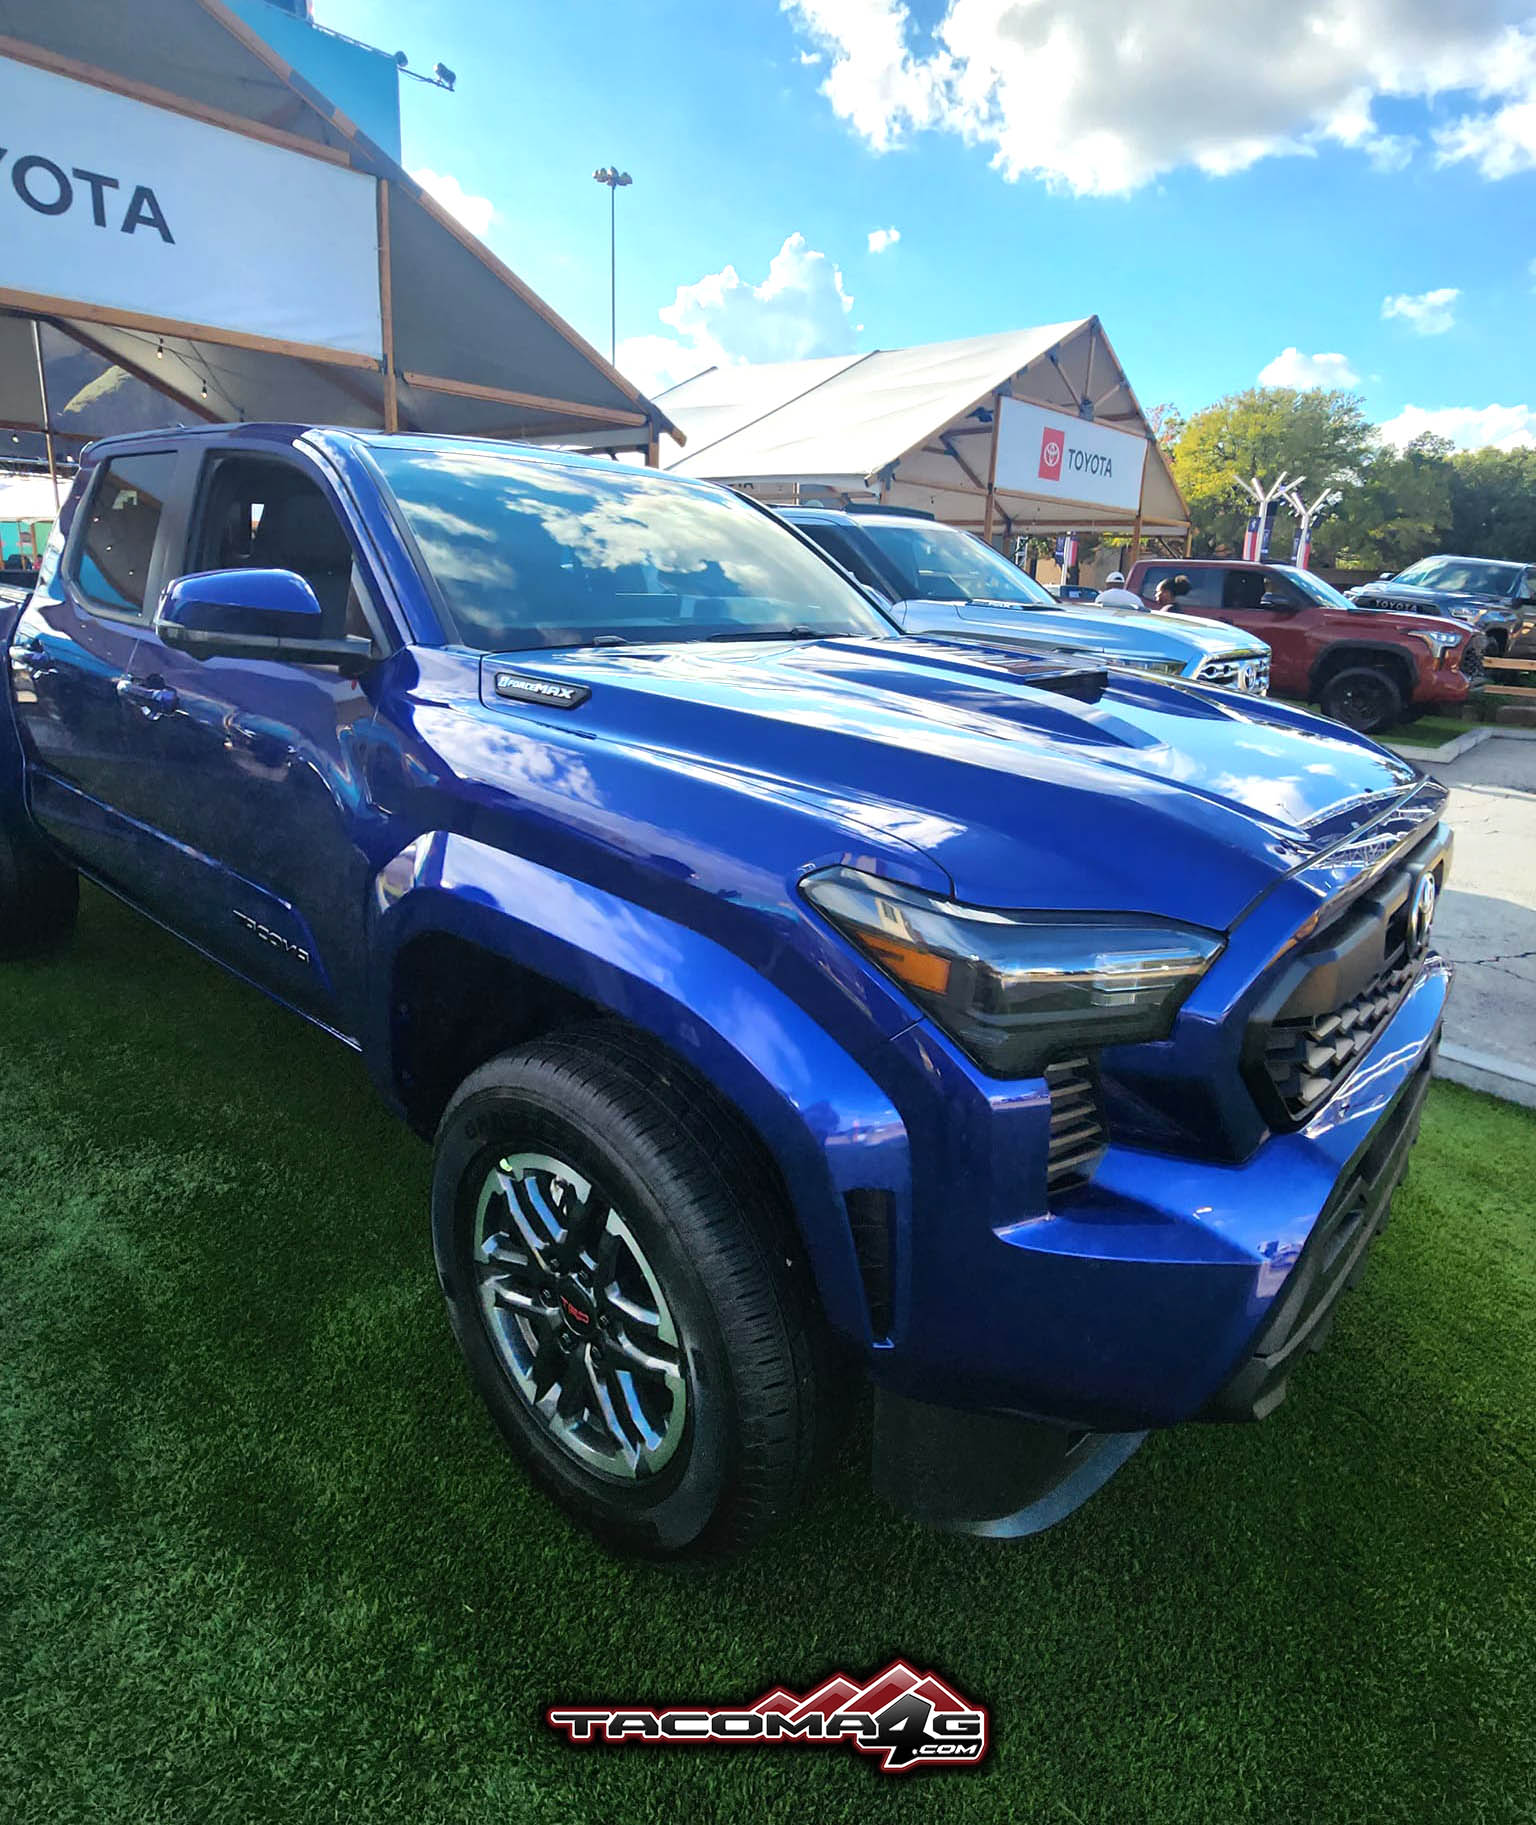 2024 Tacoma Blue Crush Metallic 2024 Tacoma TRD Sport i-Force MAX Hybrid -- exterior & interior first look! 7Blue Crush Metallic 2024 Tacoma Toyota Color Paint Engine Bed 